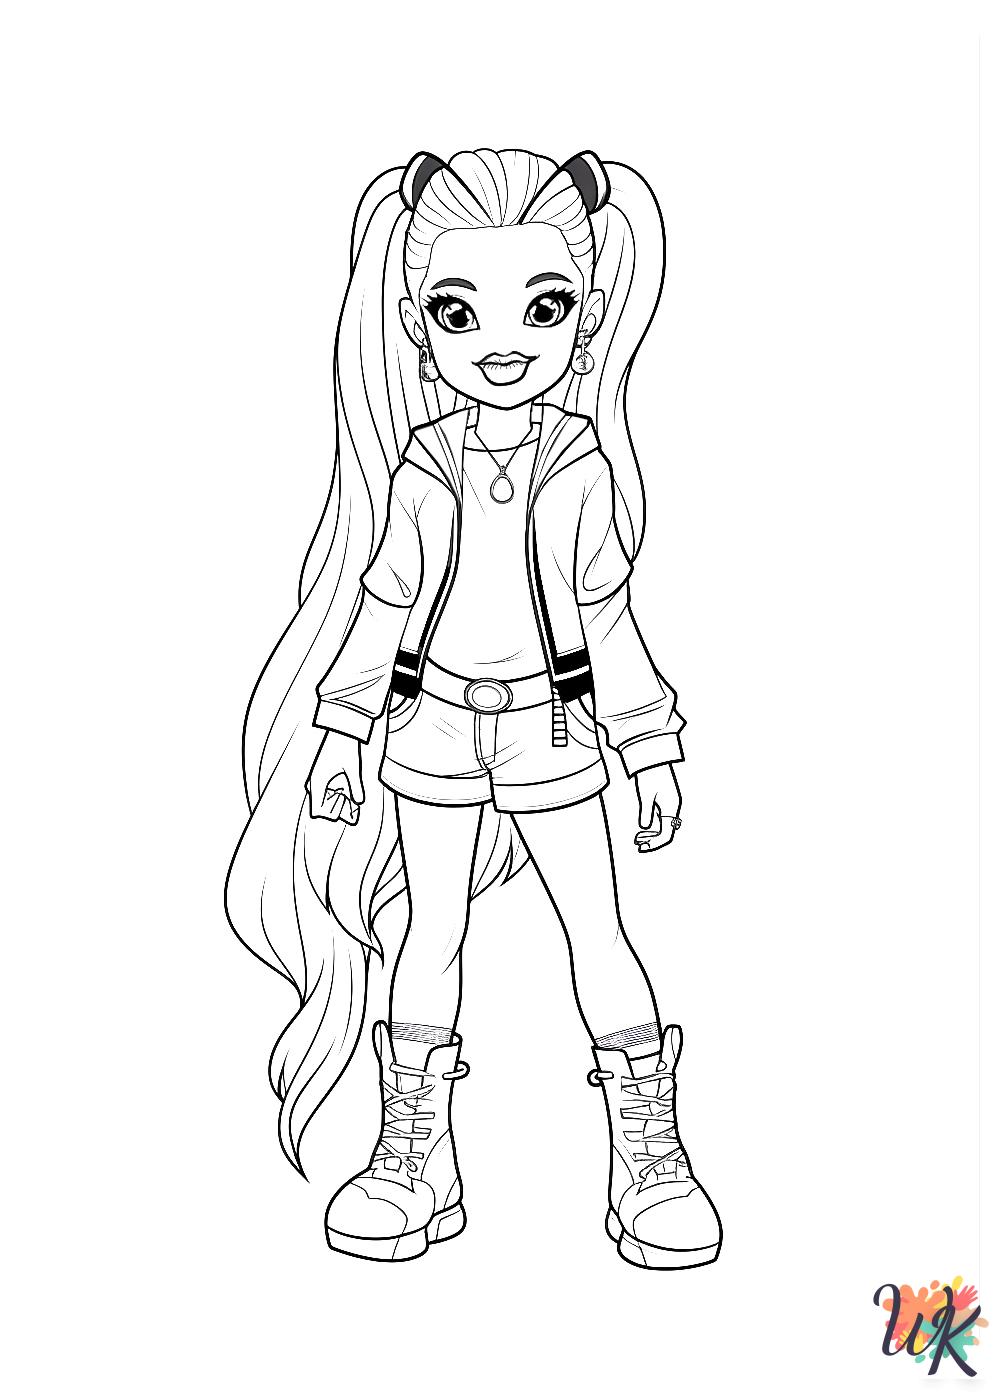 Bratz coloring pages for adults easy